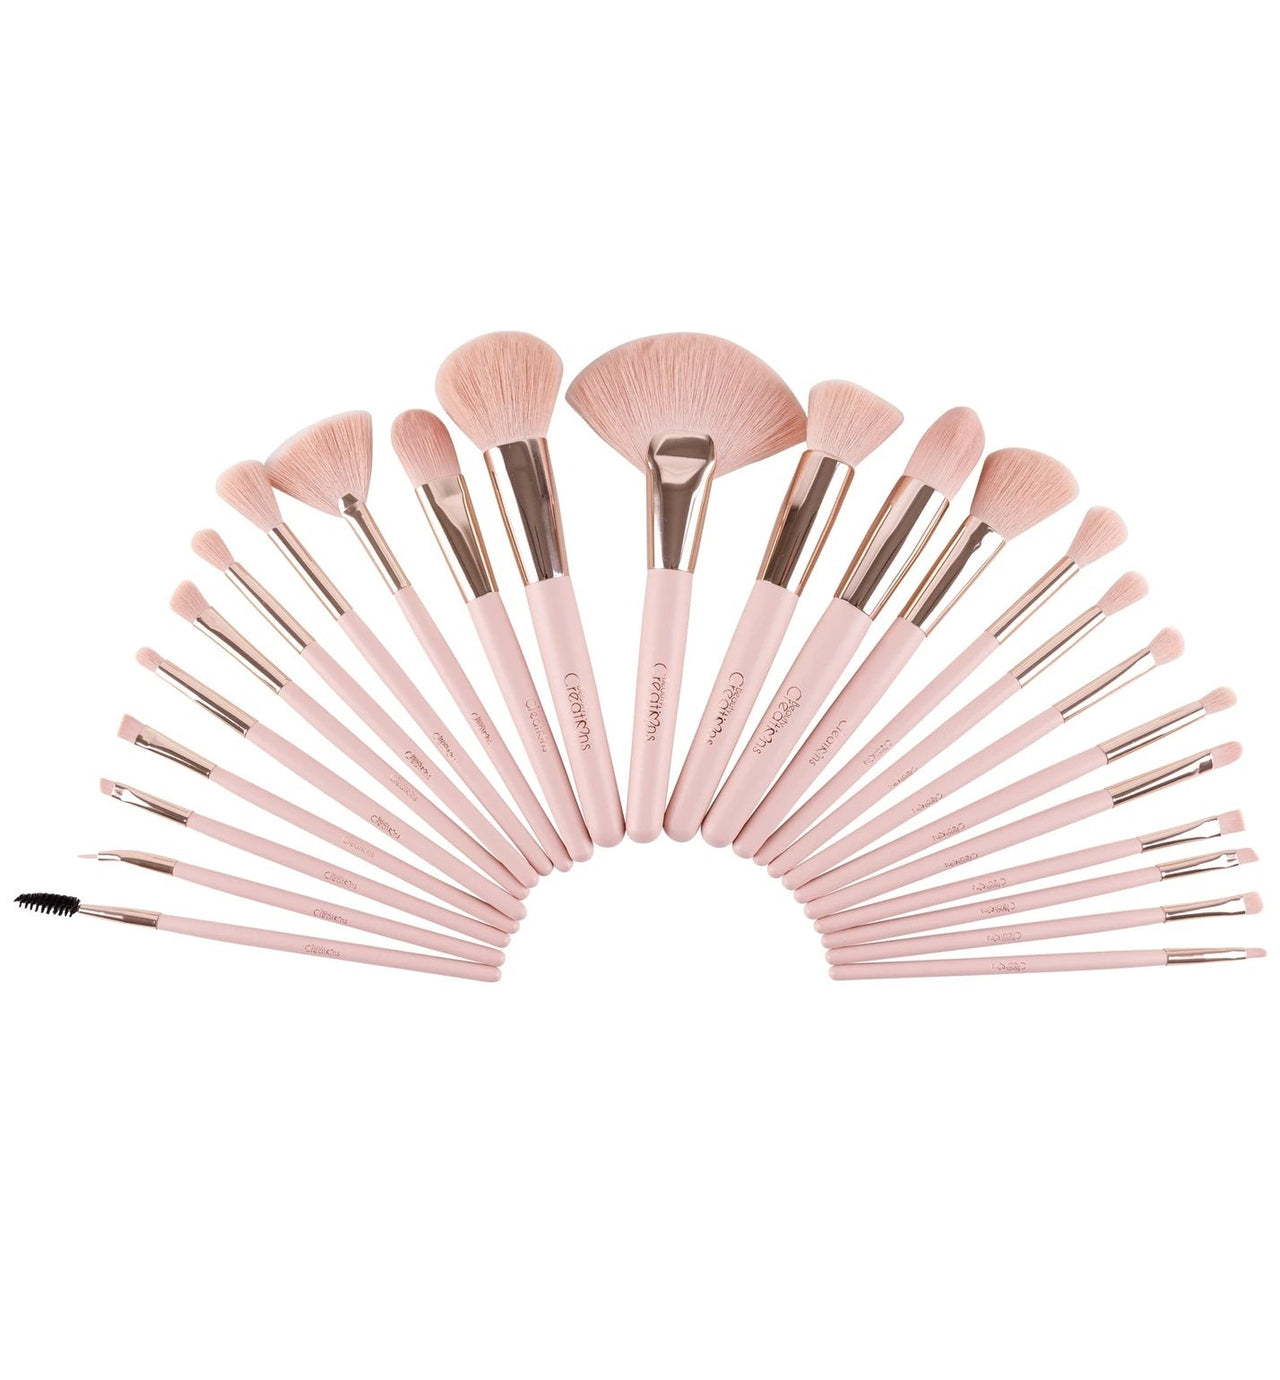 Beauty Creations - Pretty in Pink Brush Set